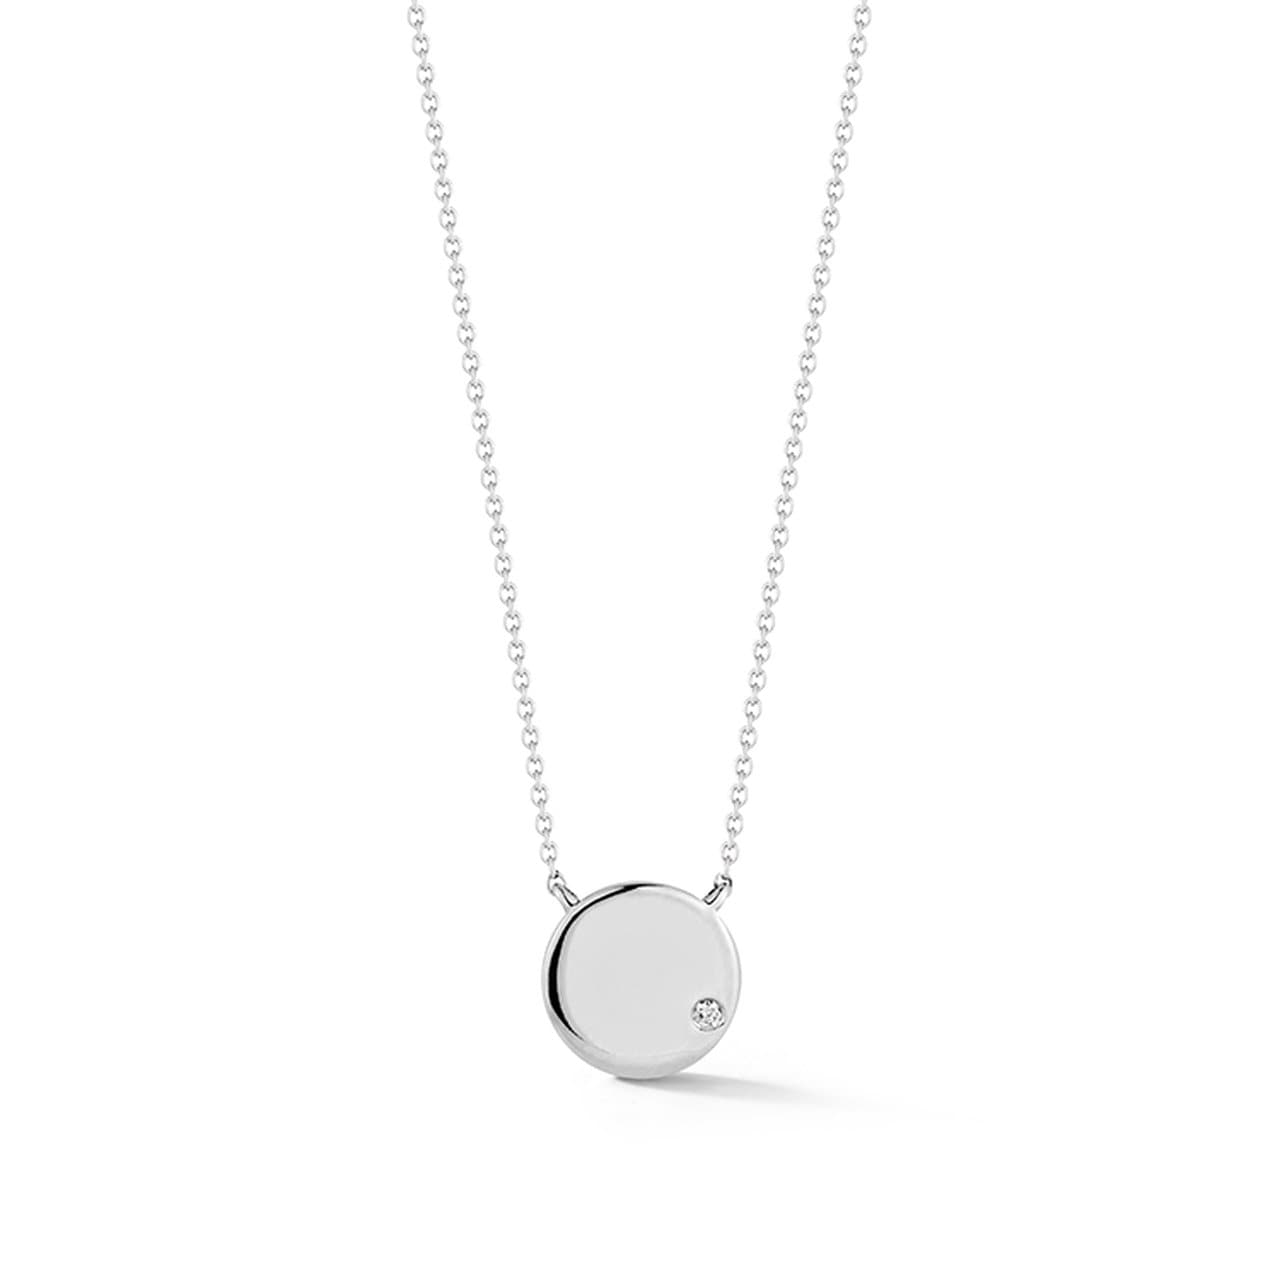 Dana Rebecca Designs Necklaces and Pendants Lulu Jack Gold Disc Necklace - White Gold 16/18"